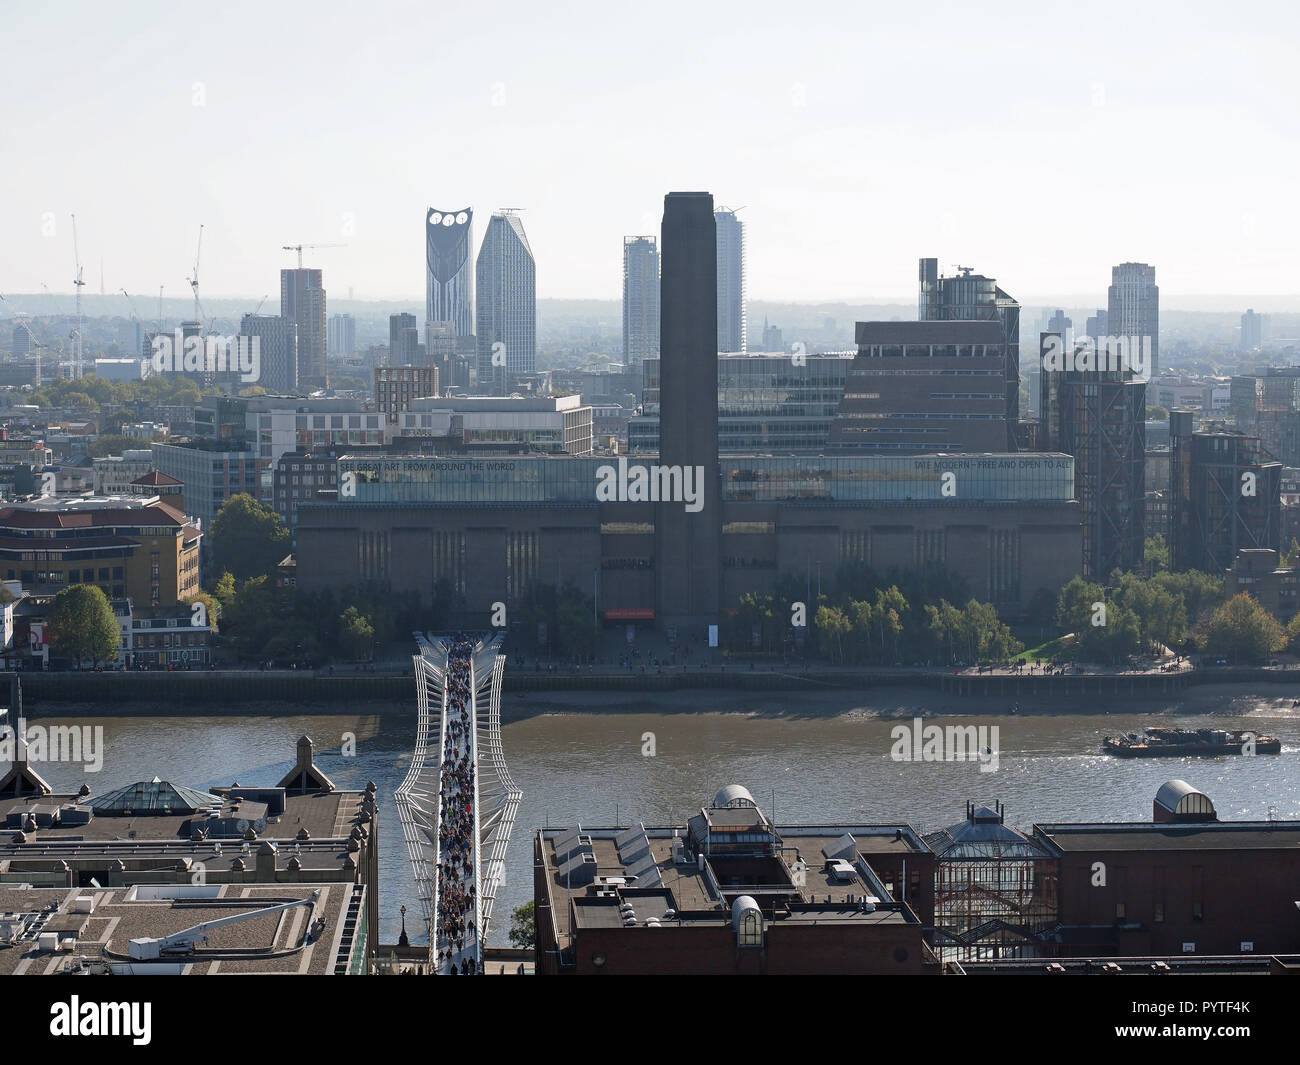 View looking down on the Tate Modern art gallery in London UK Stock Photo